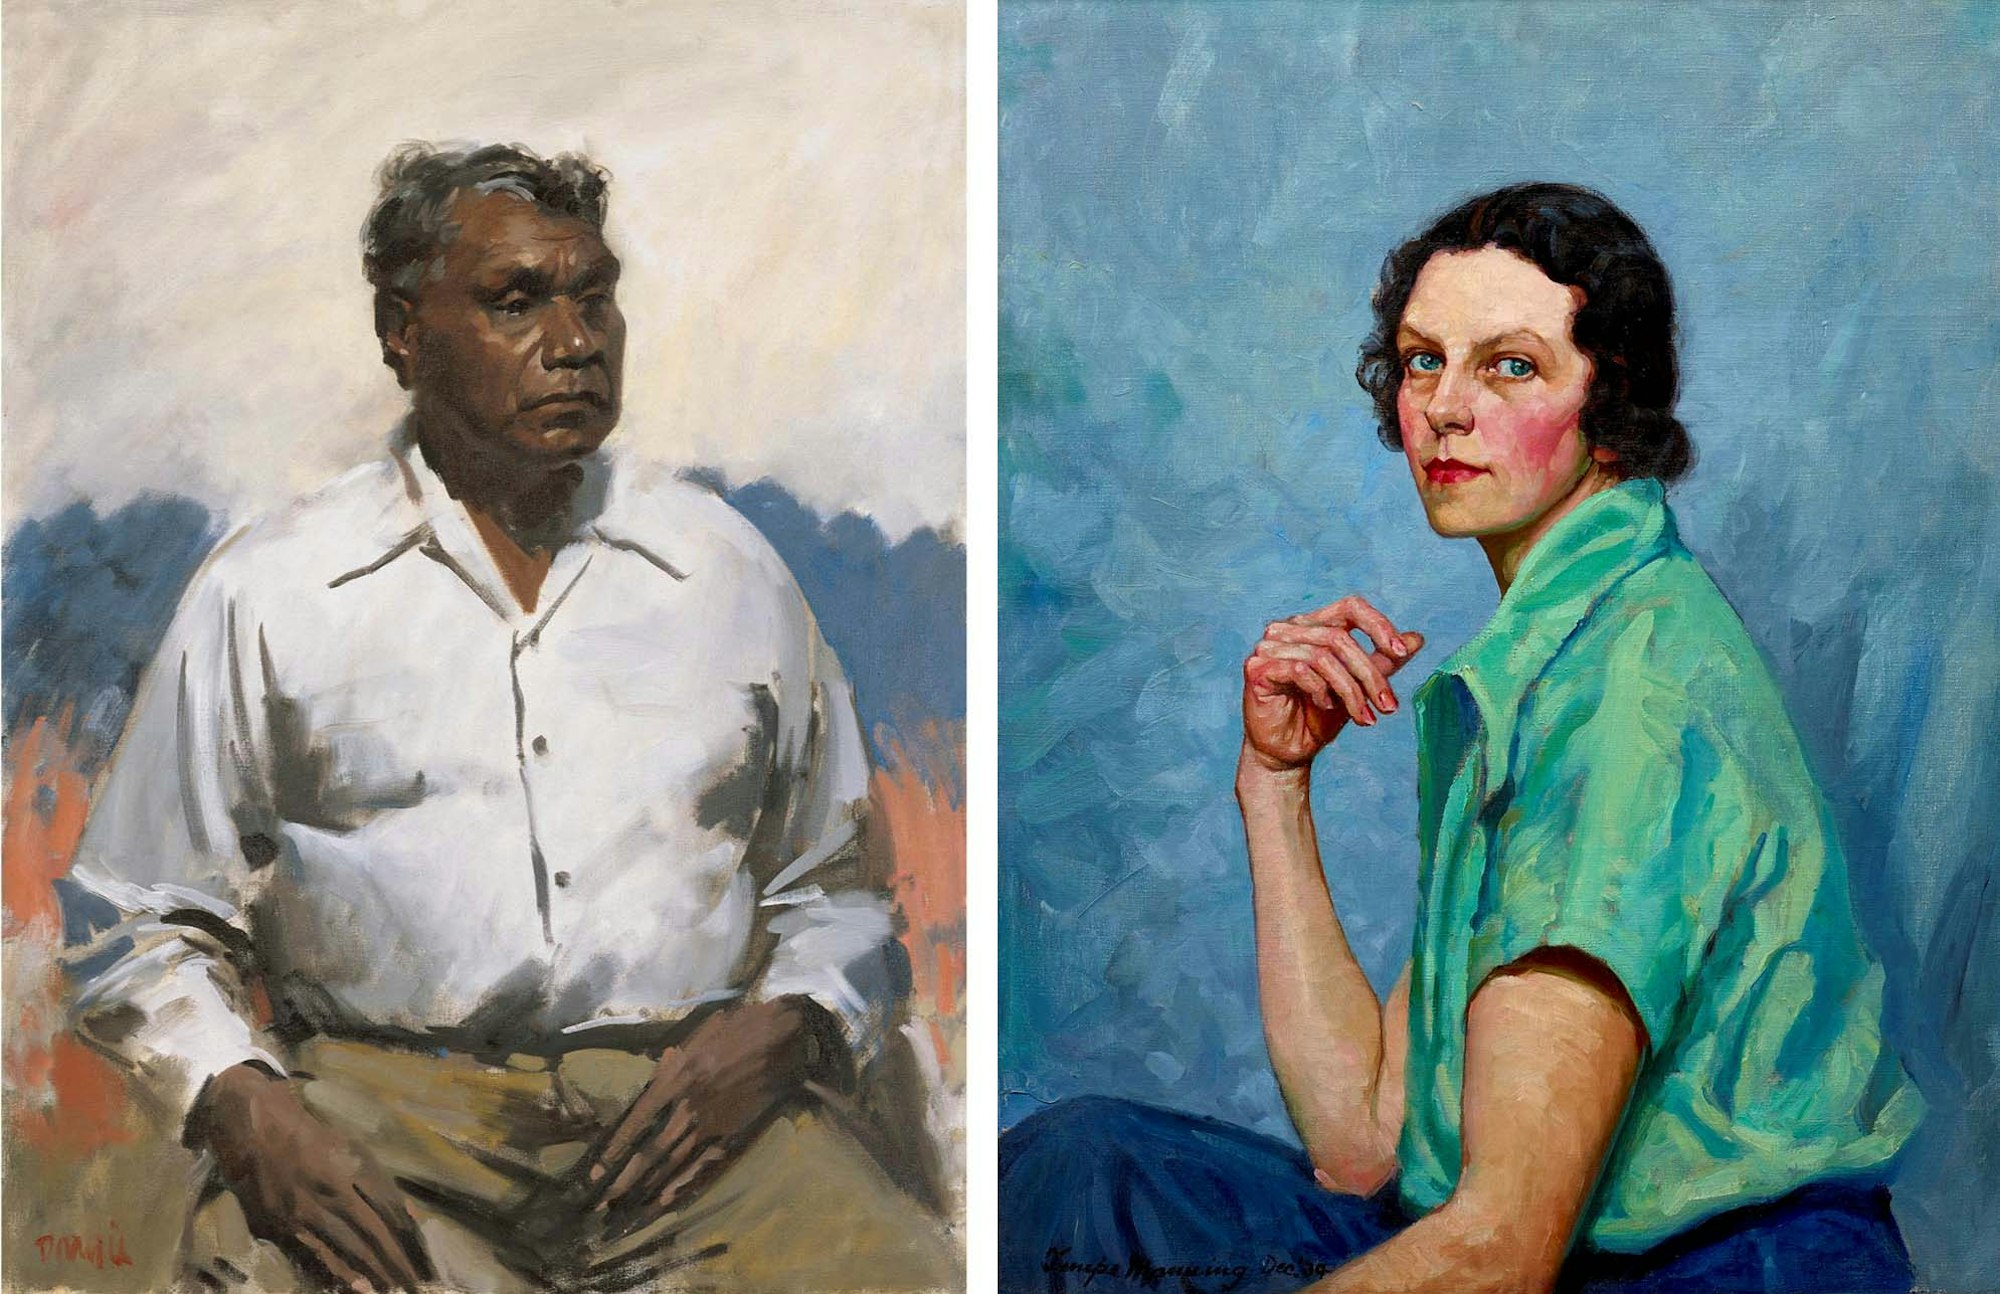 Two portraits of seated figures. The one of the left depicts a person with short hair and dark skin, wearing a white shirt. The one on the right depicts a person with fair skin and chin-length hair wearing a green shirt.